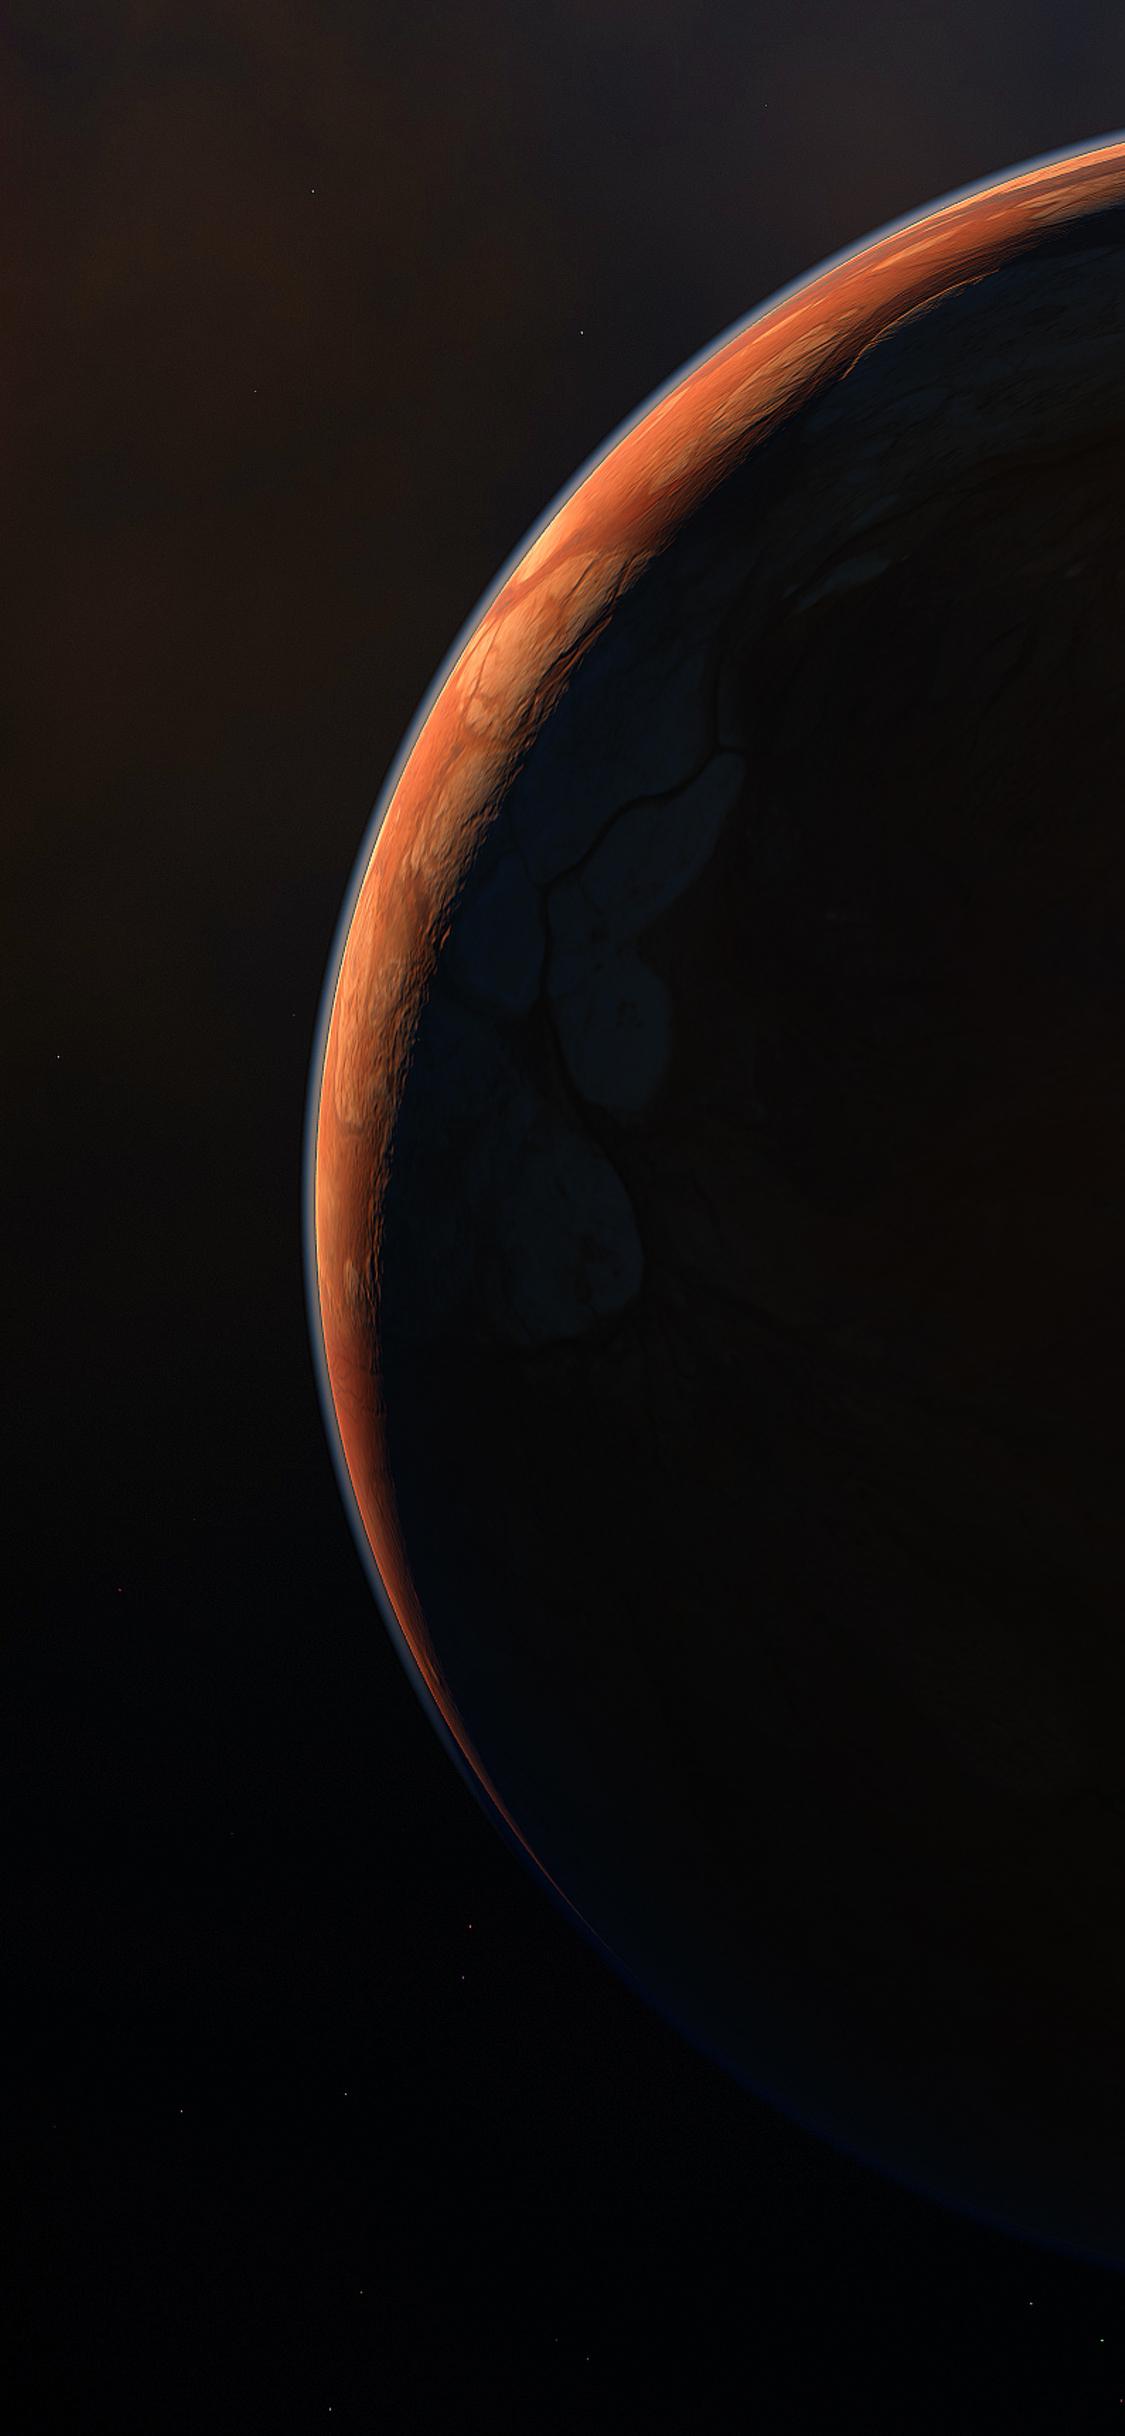 Scifi Space Planet 4k iPhone XS, iPhone iPhone X